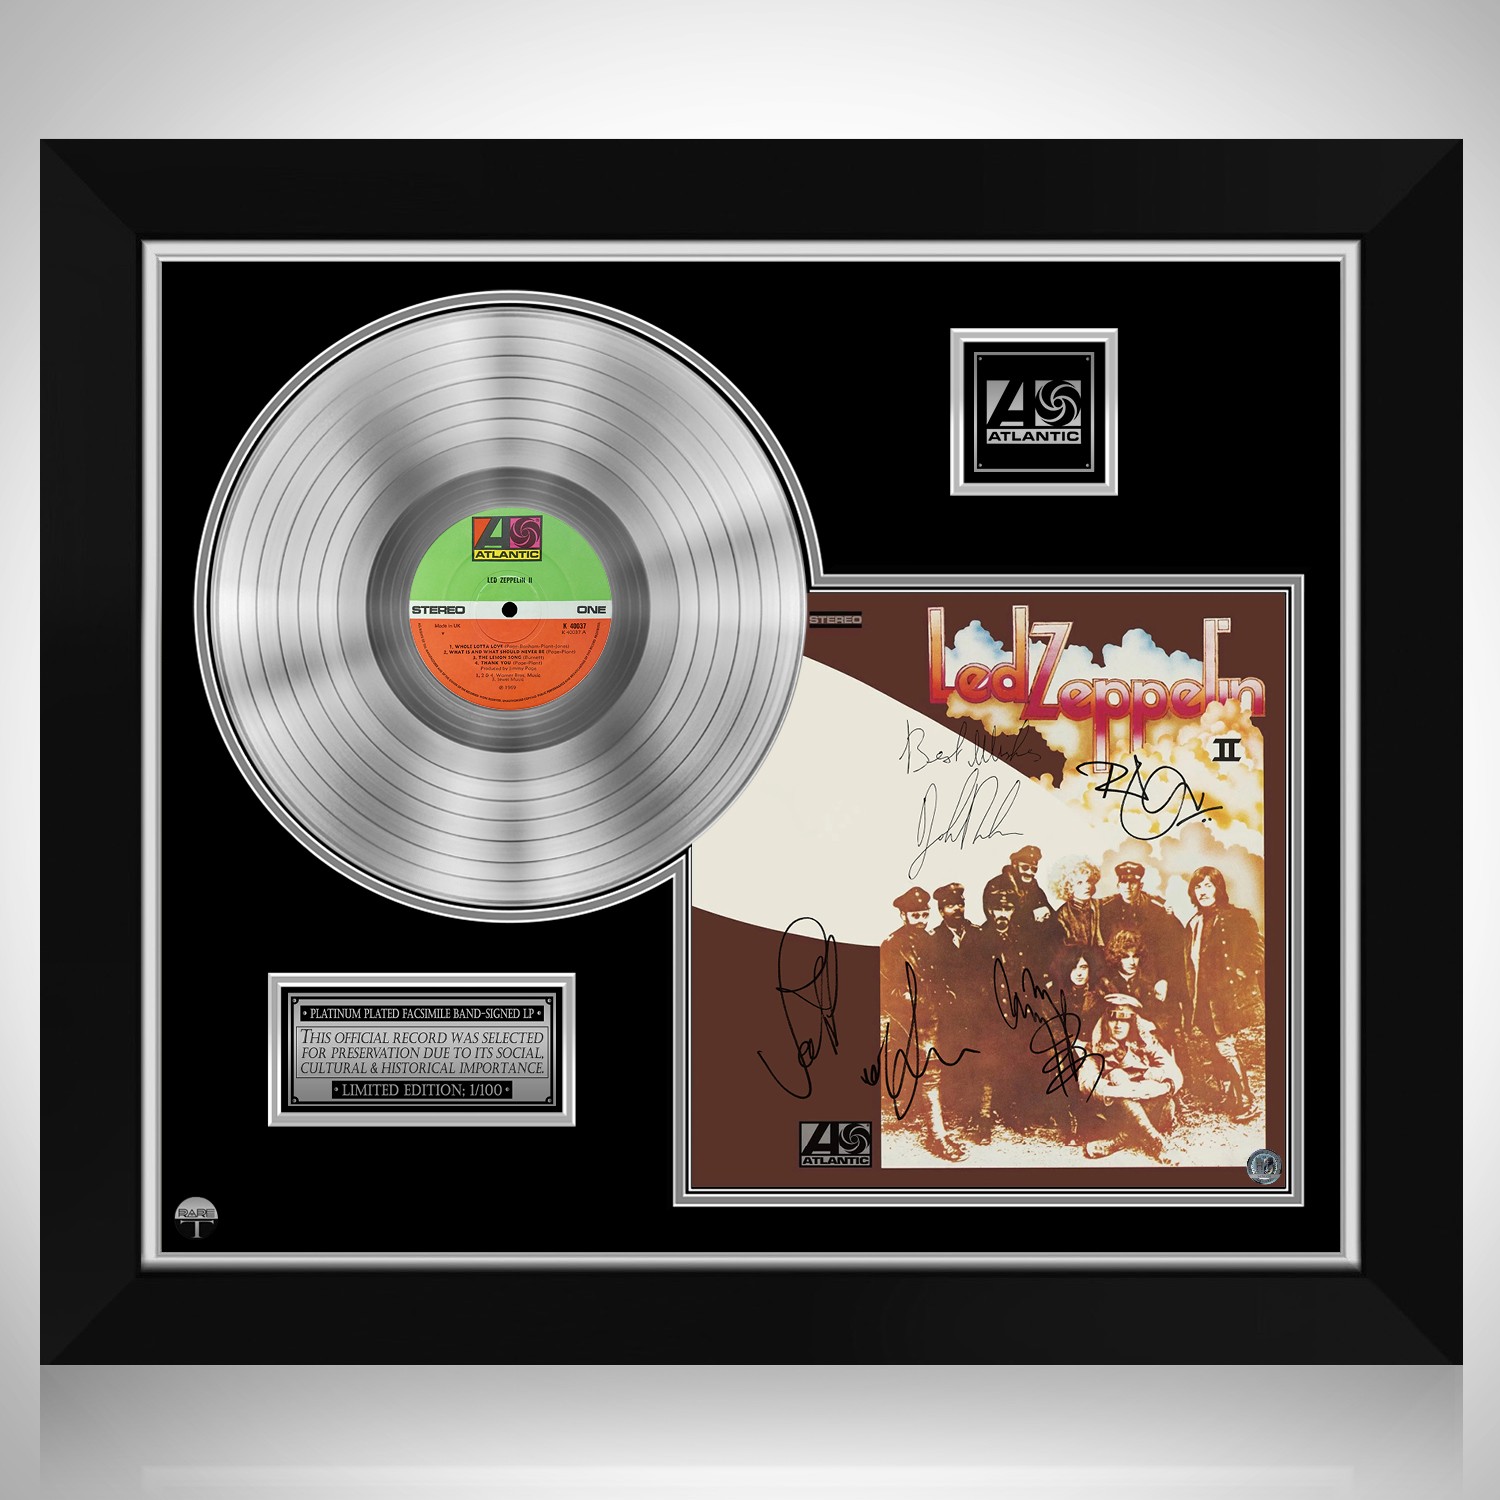 The Yardbirds - Having a Rave up with The Yardbirds LP Cover Limited  Signature Edition Custom Frame